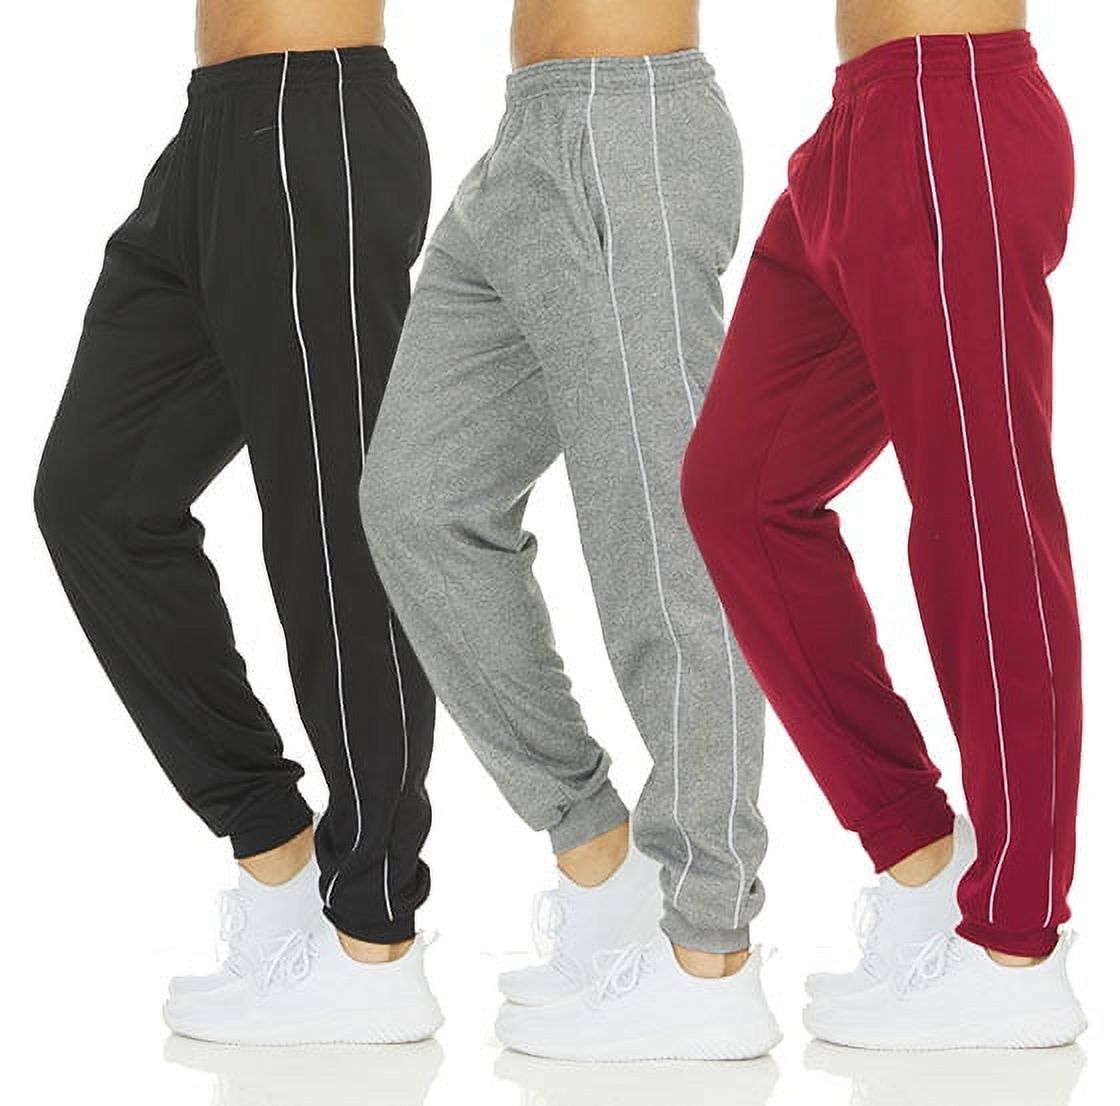 DARESAY [3-Pack] Men's Tech Fleece Joggers Dry Fit Performance Sweatpants (Up To Size 3XL) - image 1 of 5